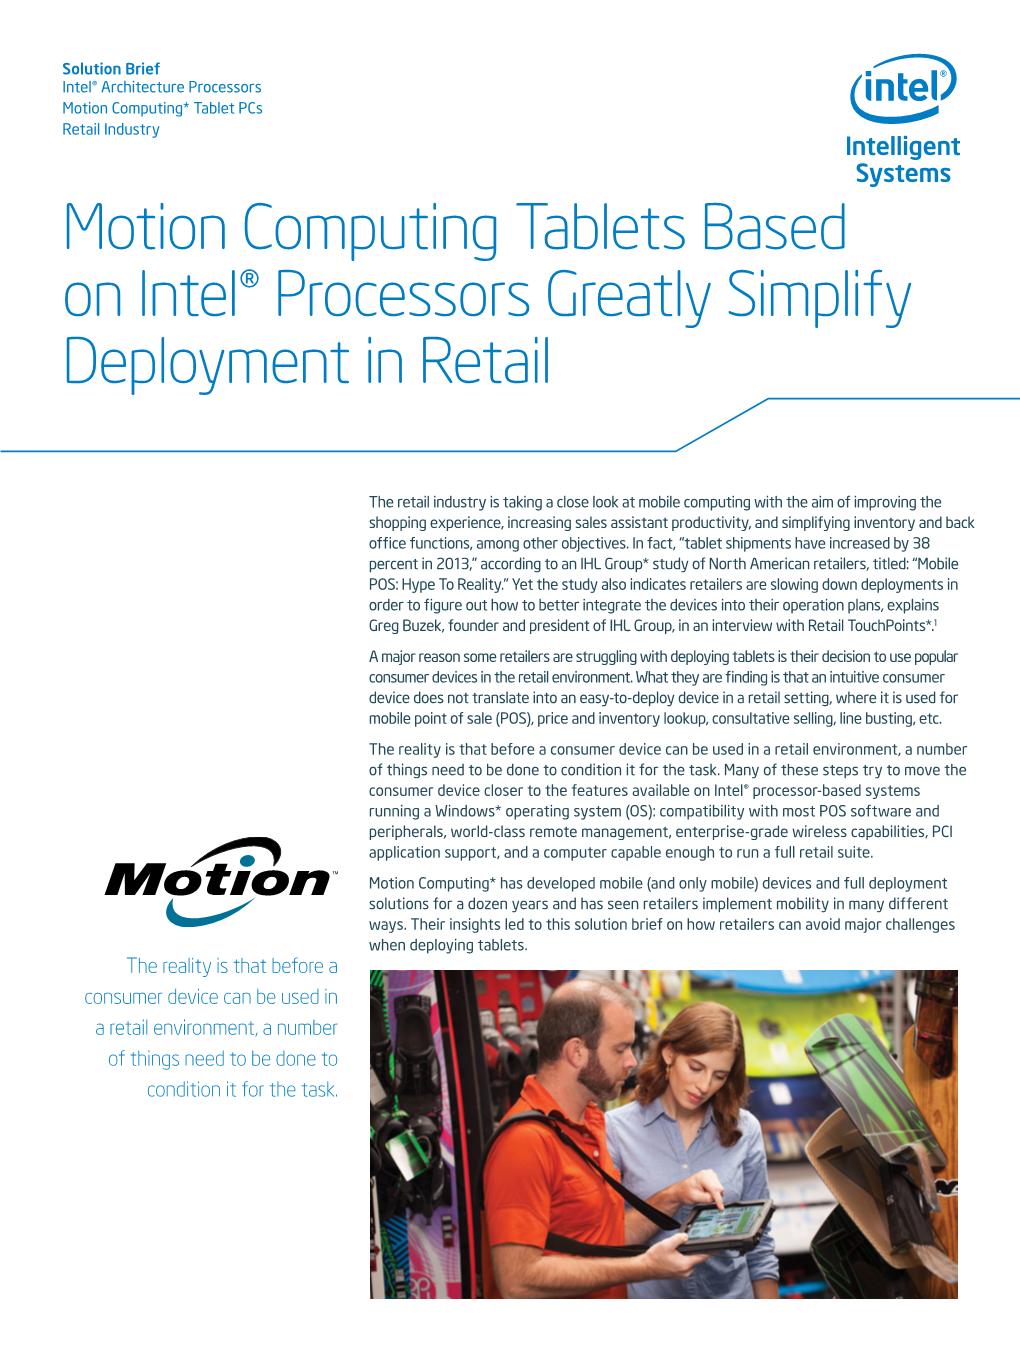 Motion Computing Tablets Based on Intel® Processors Greatly Simplify Deployment in Retail